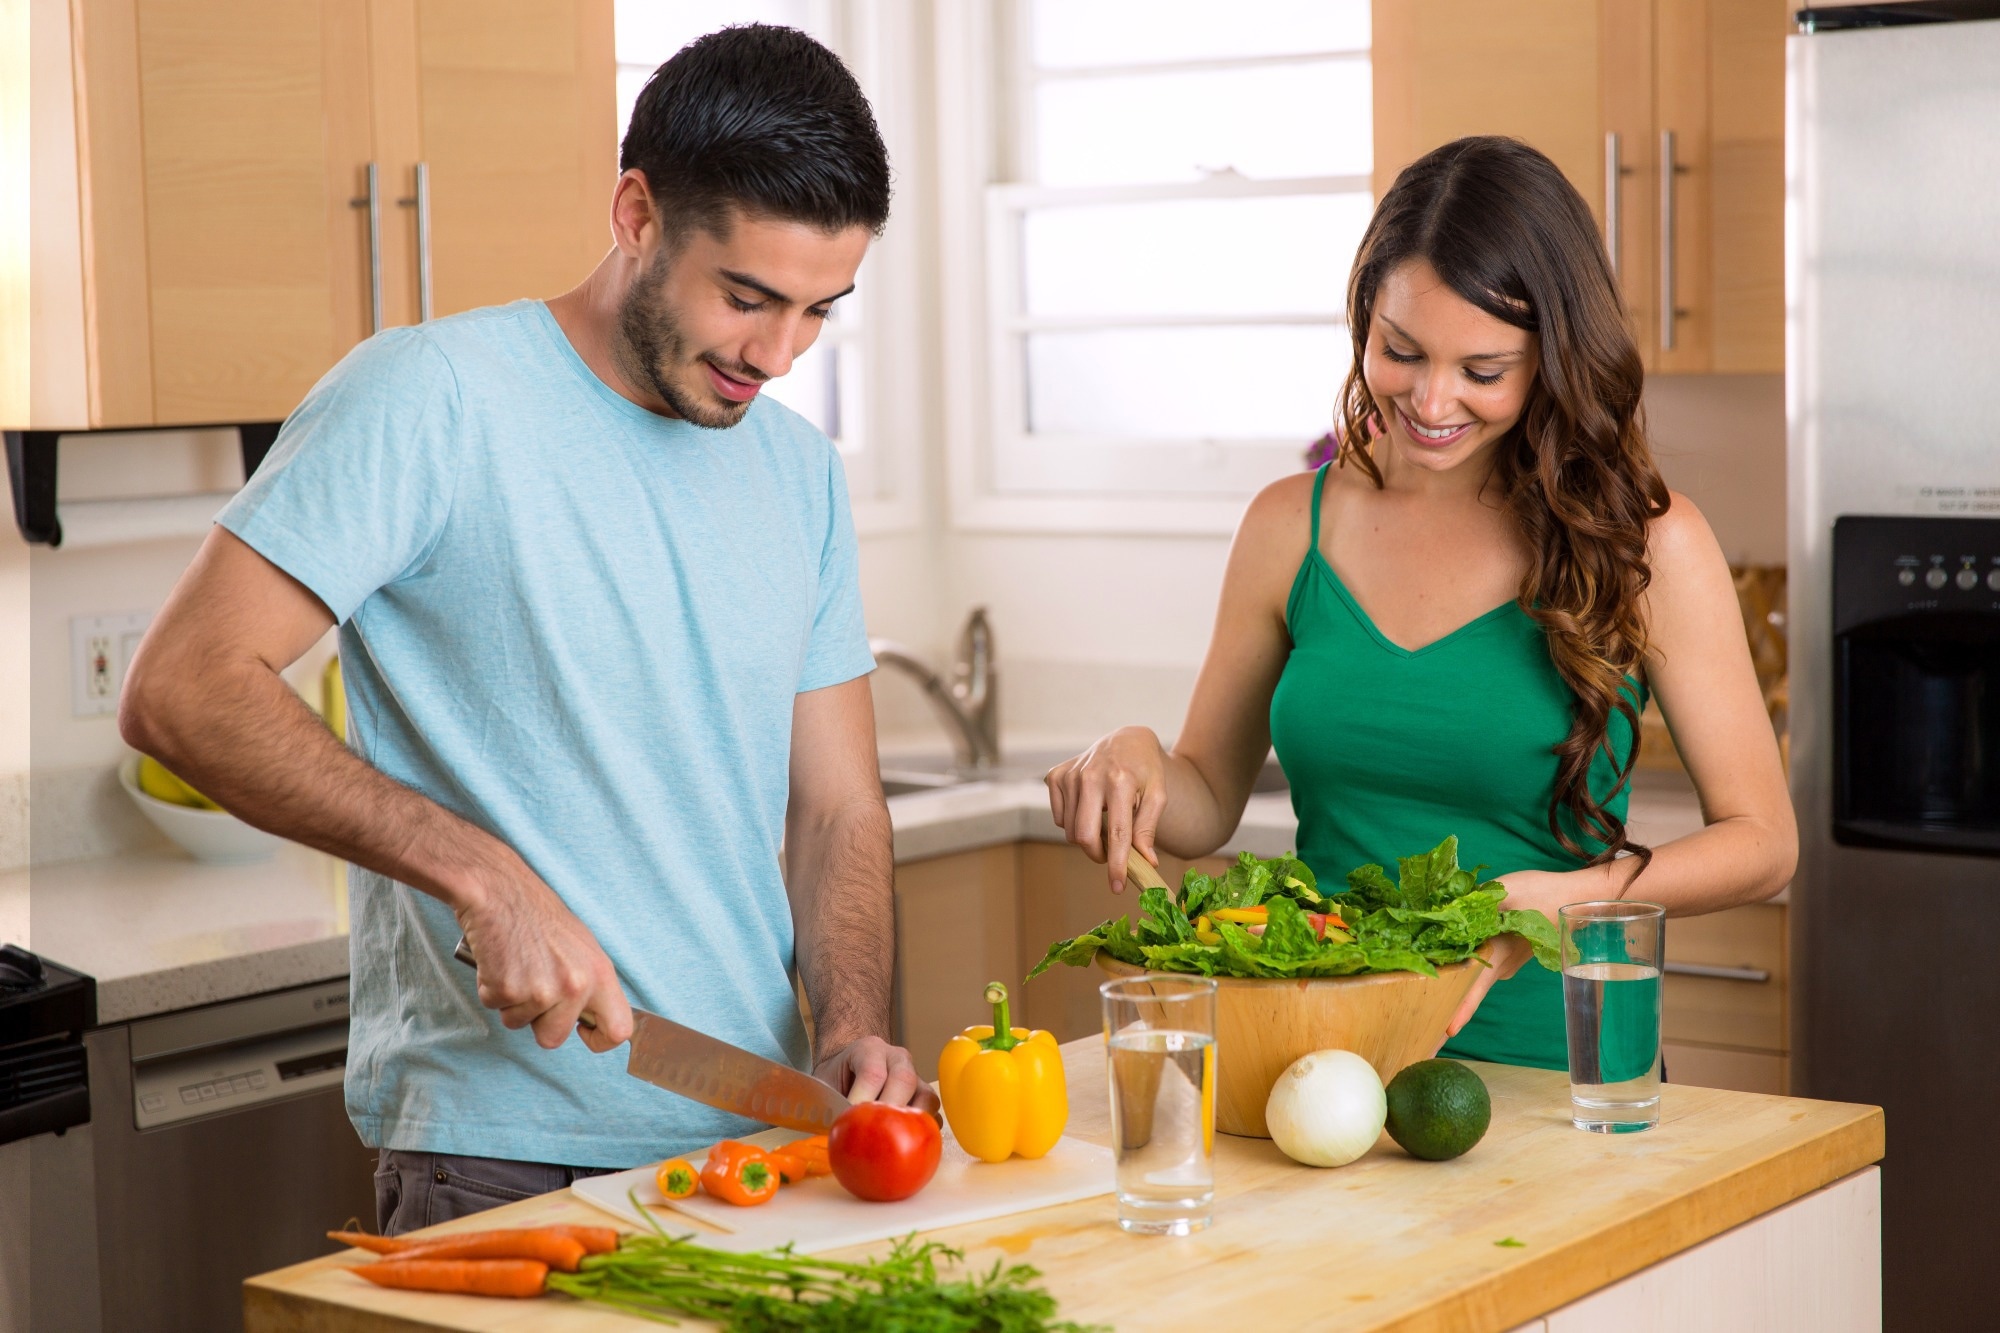 Shared eating habits of couples impact pregnancy weight gain, study suggests